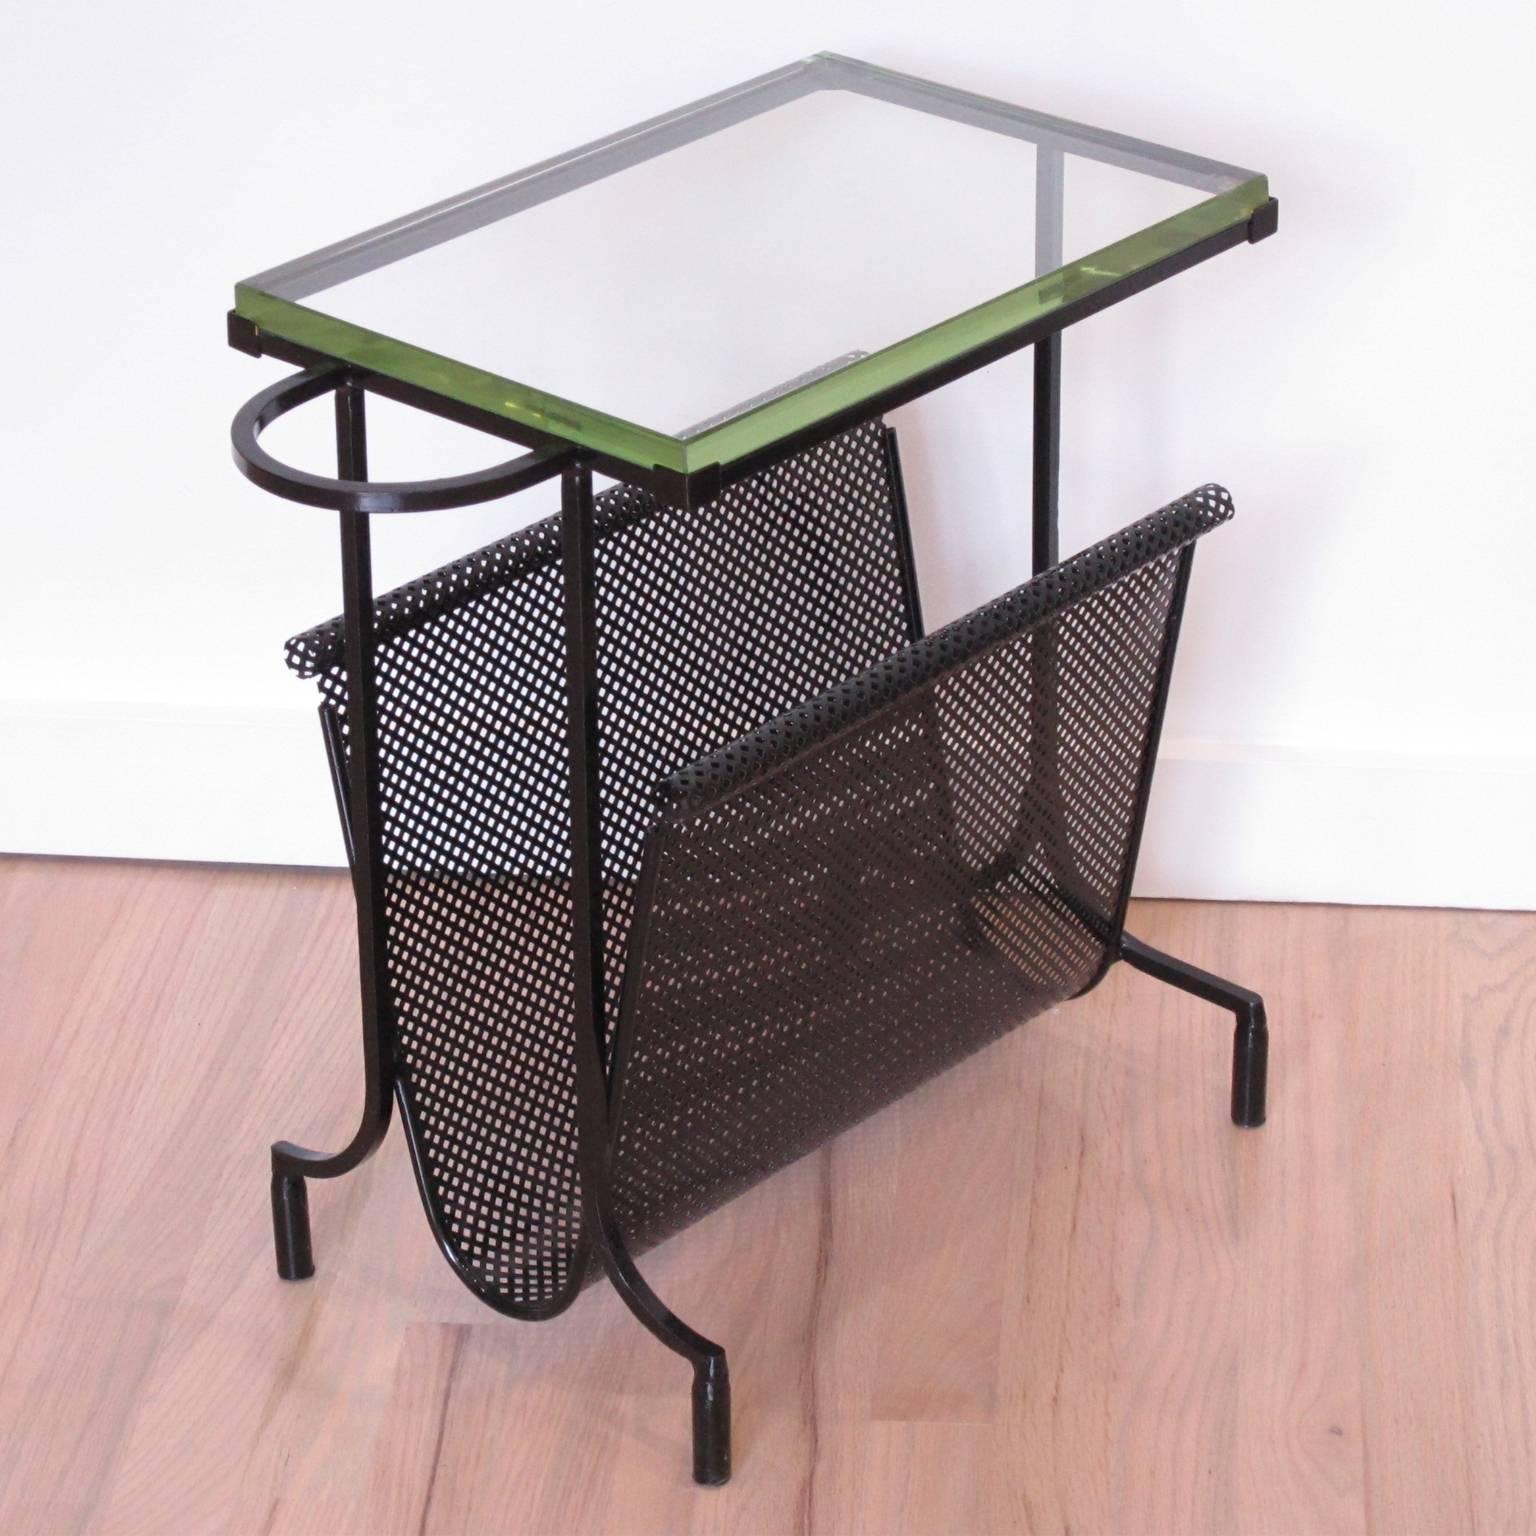 Mid-20th Century Pair of Perforated Metal Magazine Stand Side Table by Mathieu Matégot, 1950